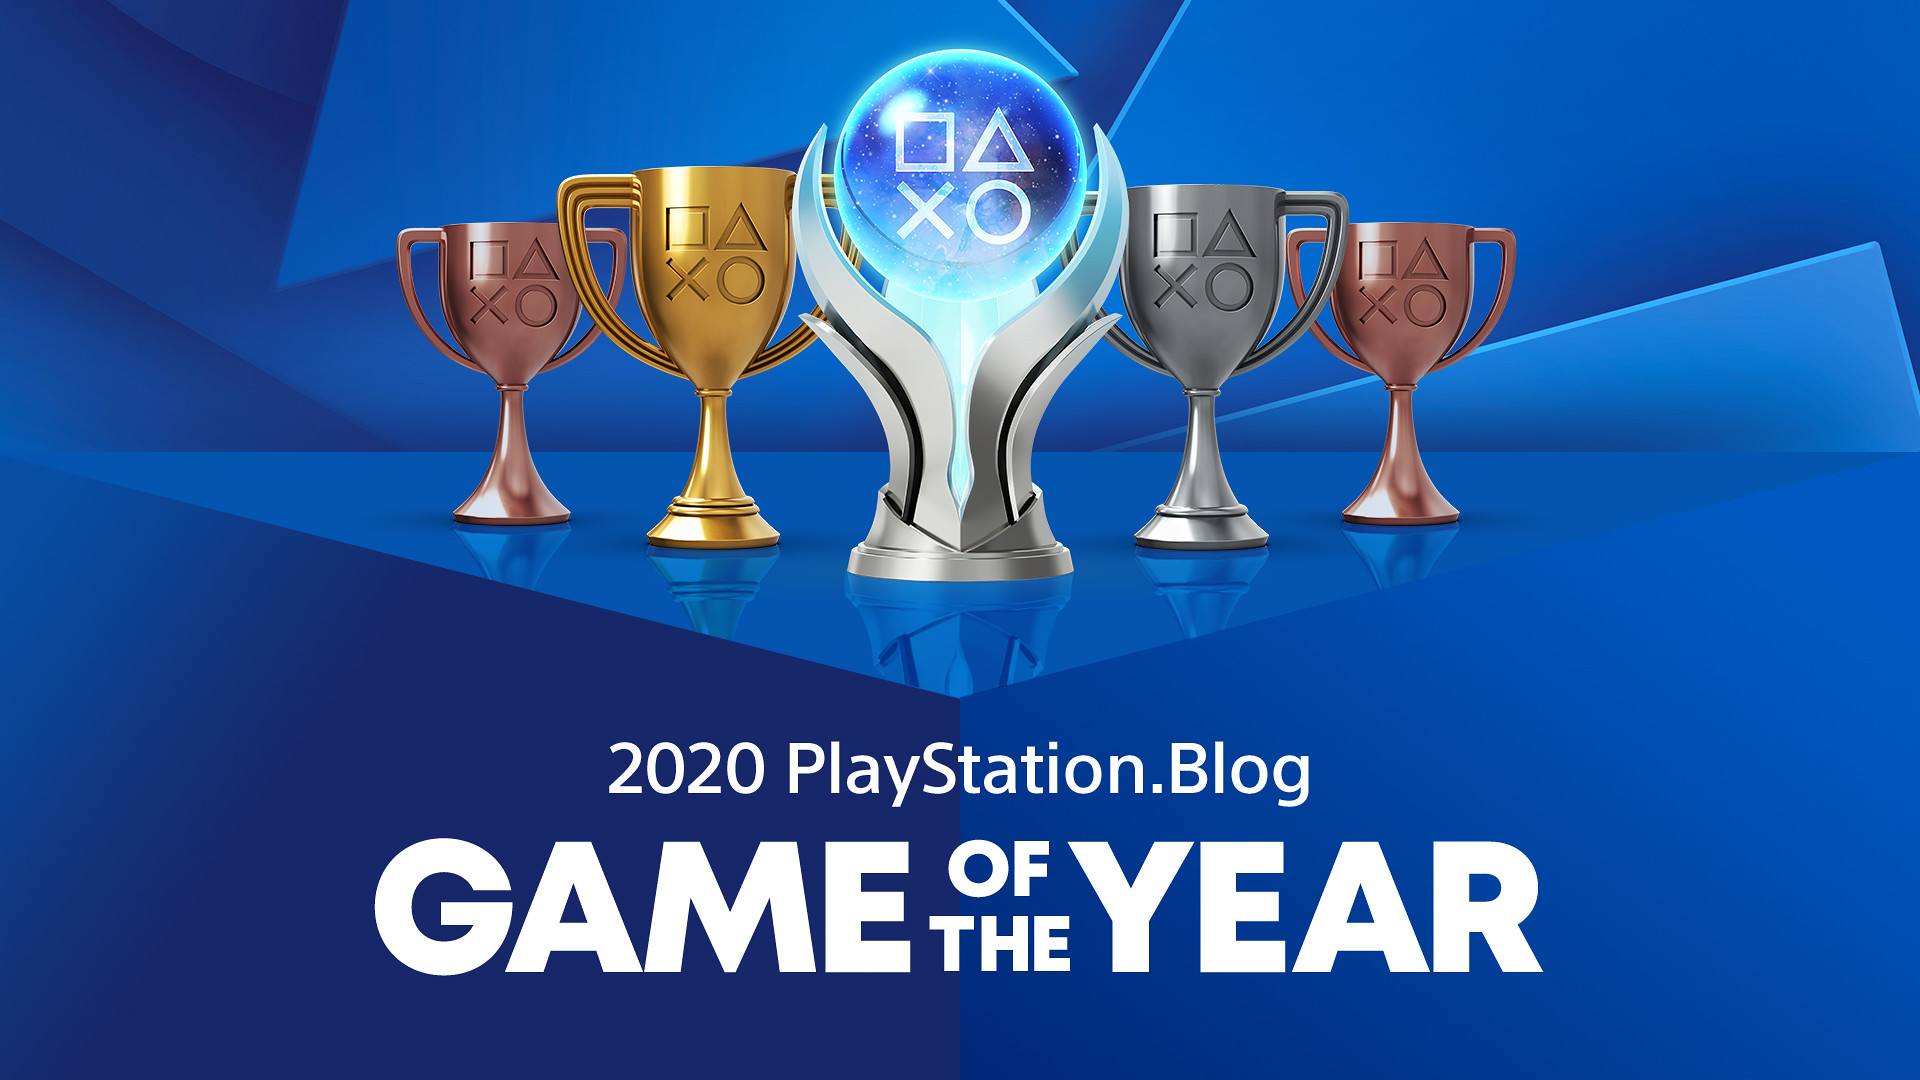 Sodavand Den anden dag Armstrong PlayStation on Twitter: "Last chance to leave a mark on this year's Game of  the Year awards at PS Blog! Cast your vote here and stay tuned for the  winners later this